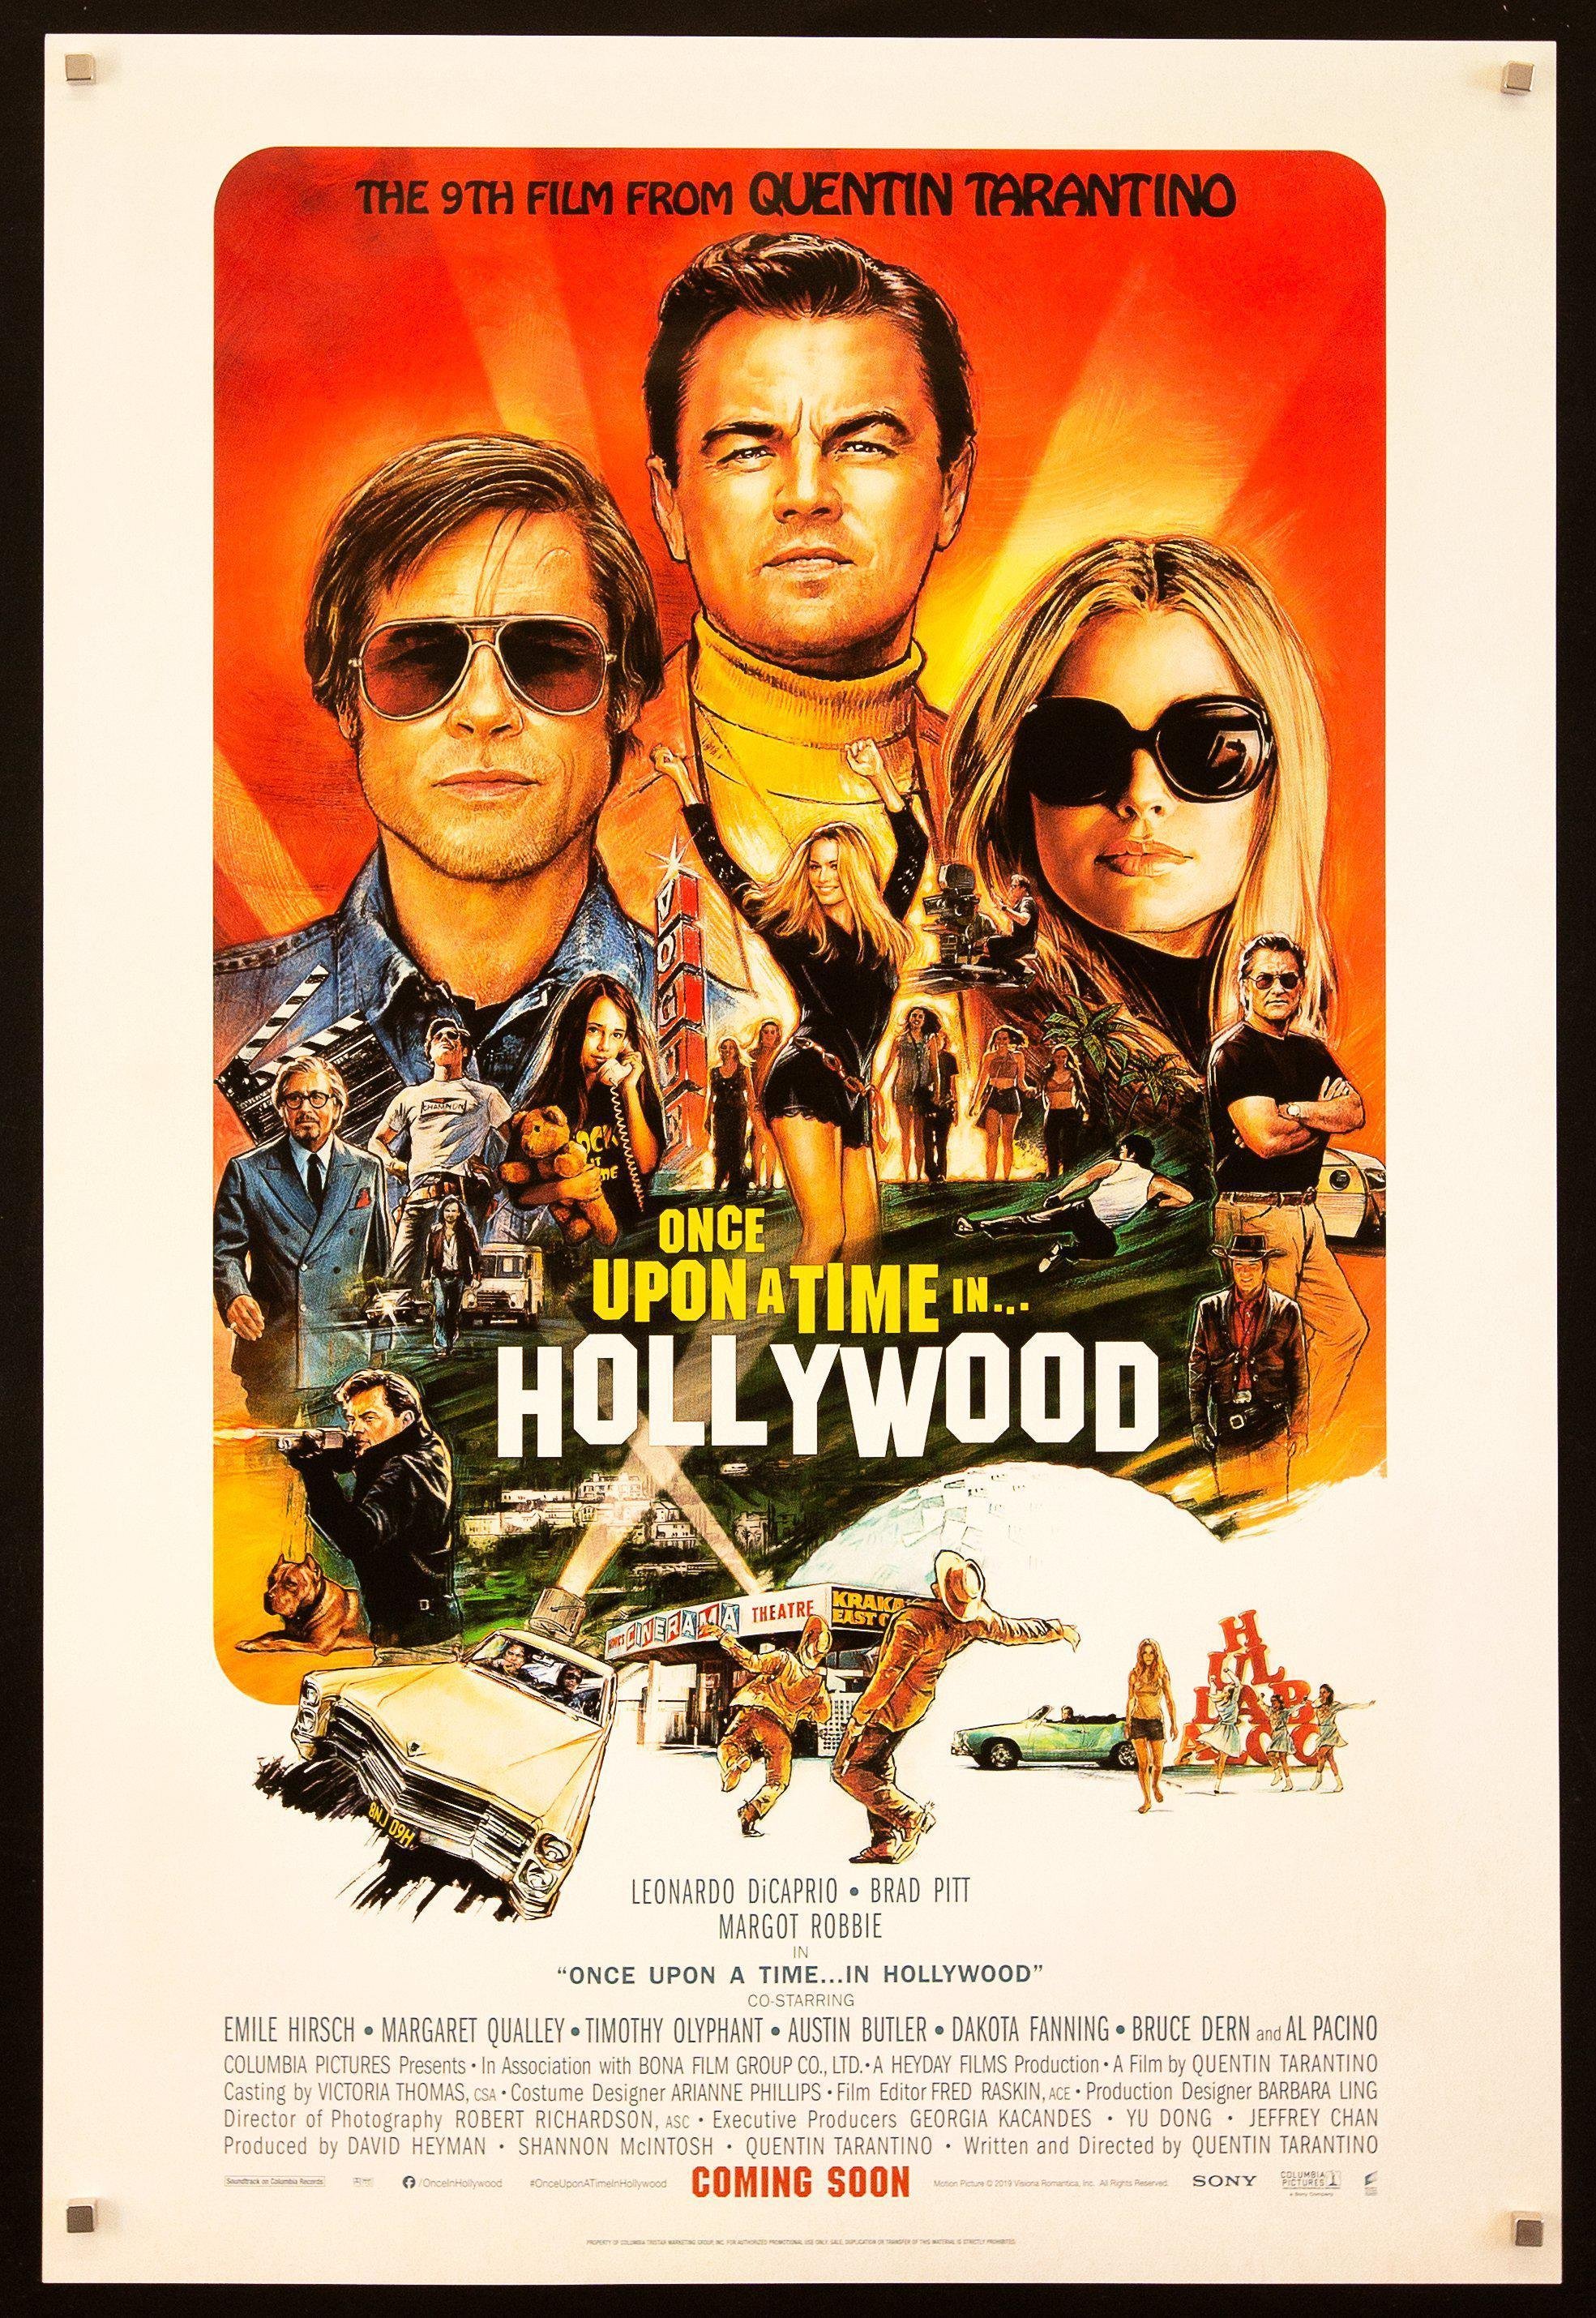 Once-Upon-a-Time-In-Hollywood-Vintage-Movie-Poster-Original-1-Sheet-27x41_4c854196-97cc-46da-bec4-565ce1a18a4b.jpg